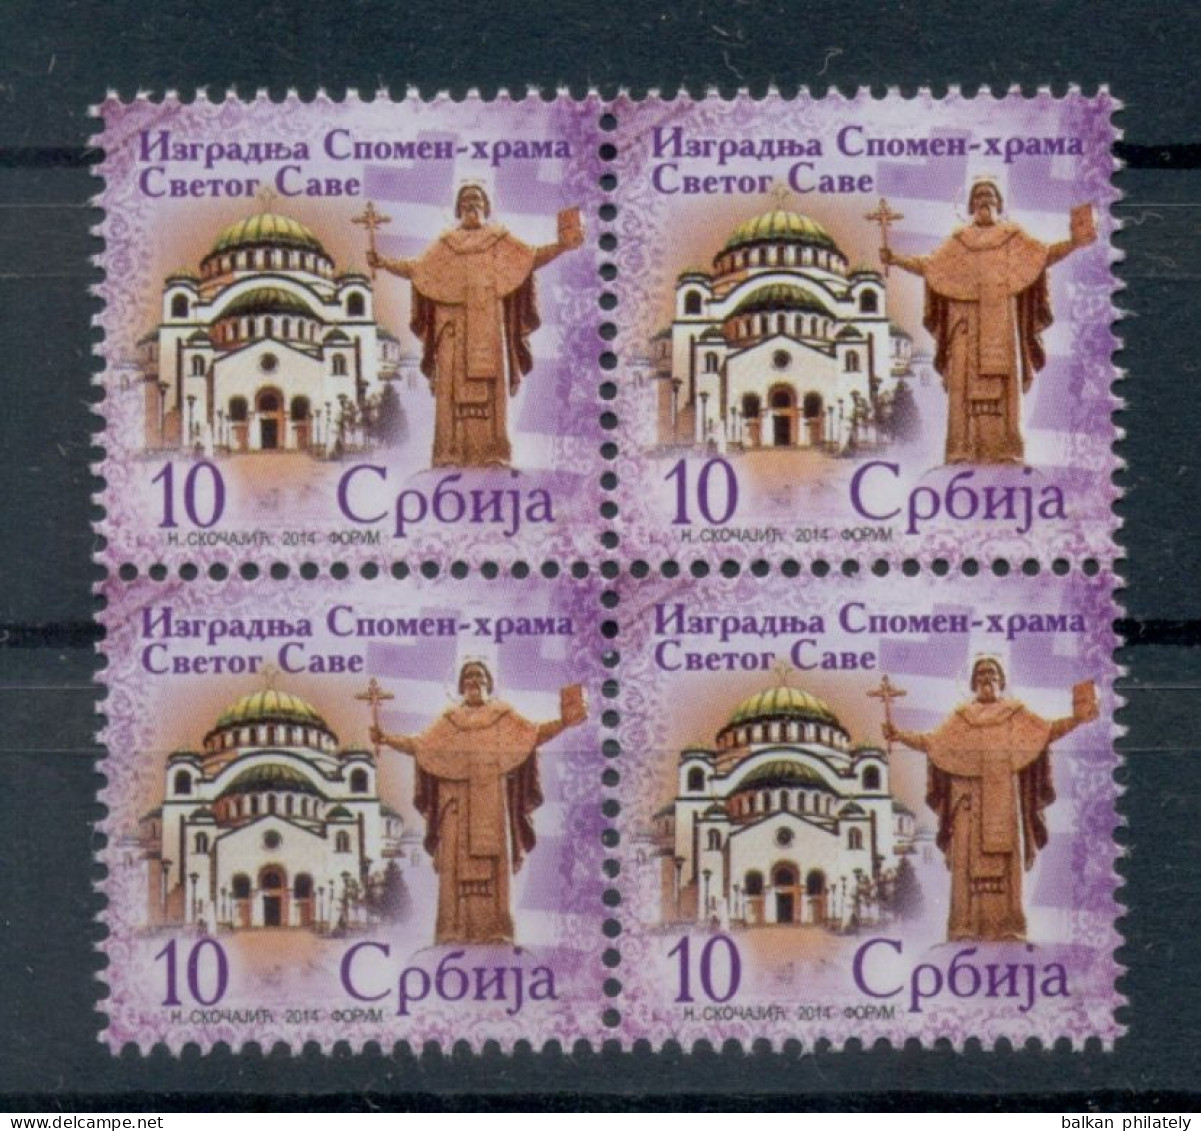 Serbia 2014 For The Temple Of Saint Sava Religions Christianity Church Tax Charity Surcharge MNH - Serbie